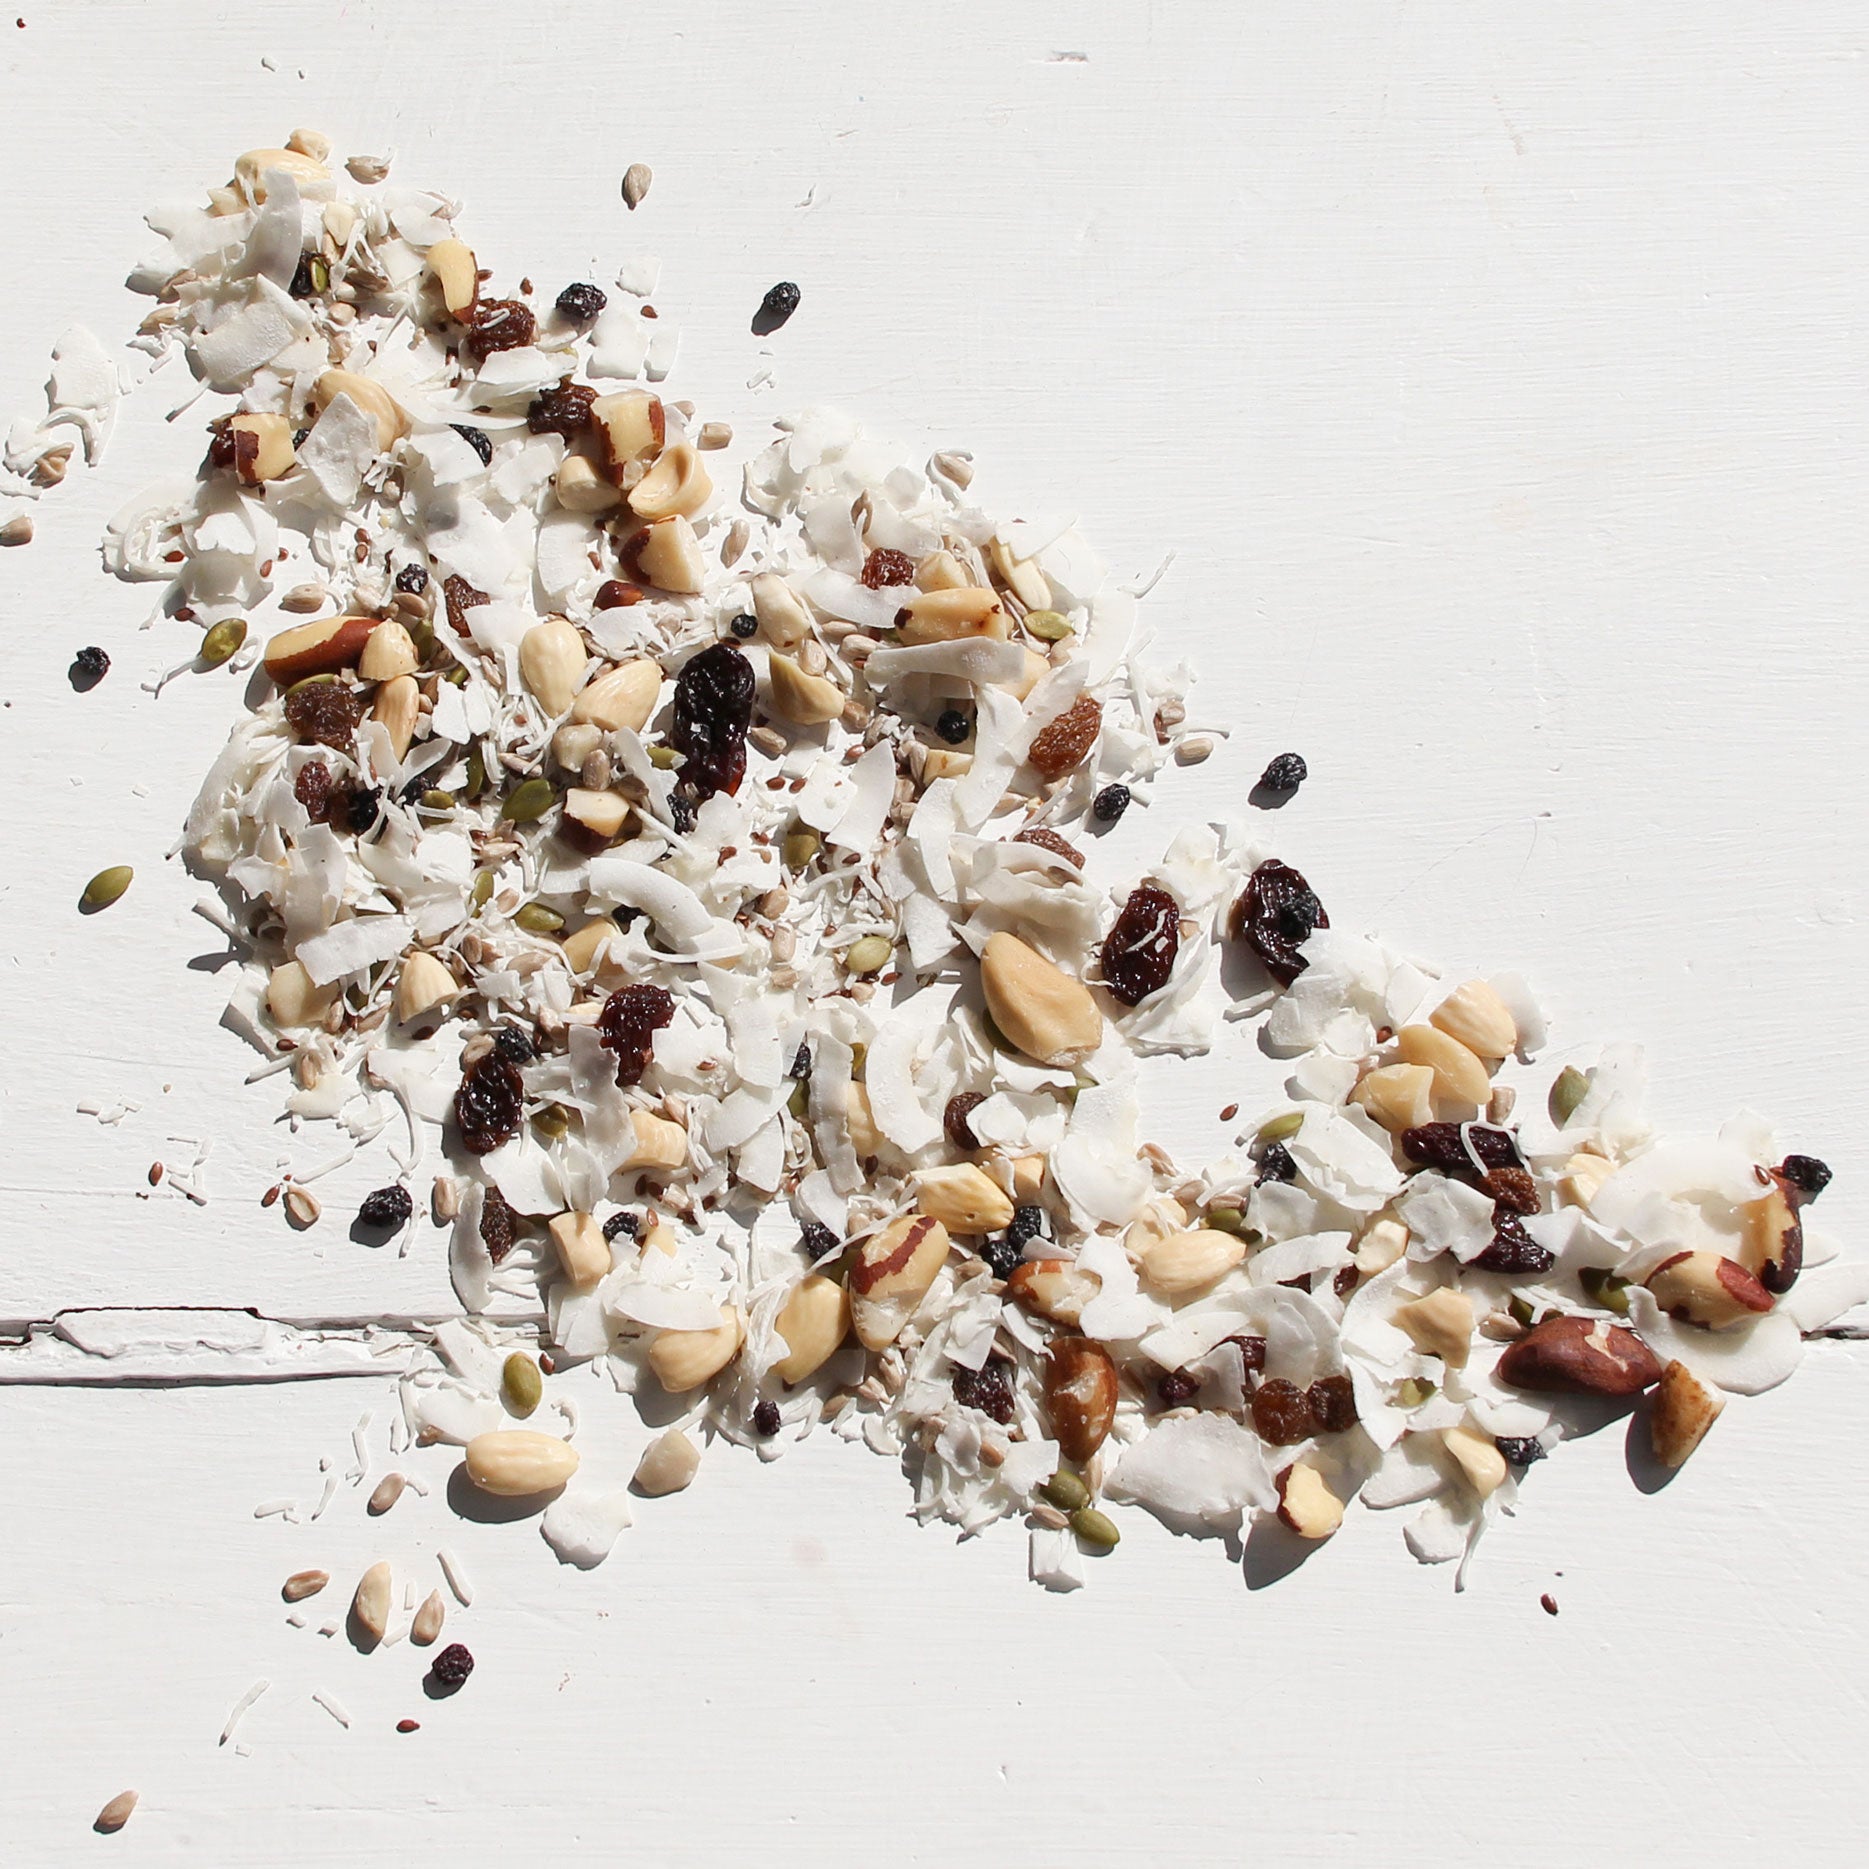 Paleo Raw Muesli (gluten-free) - for a limited time